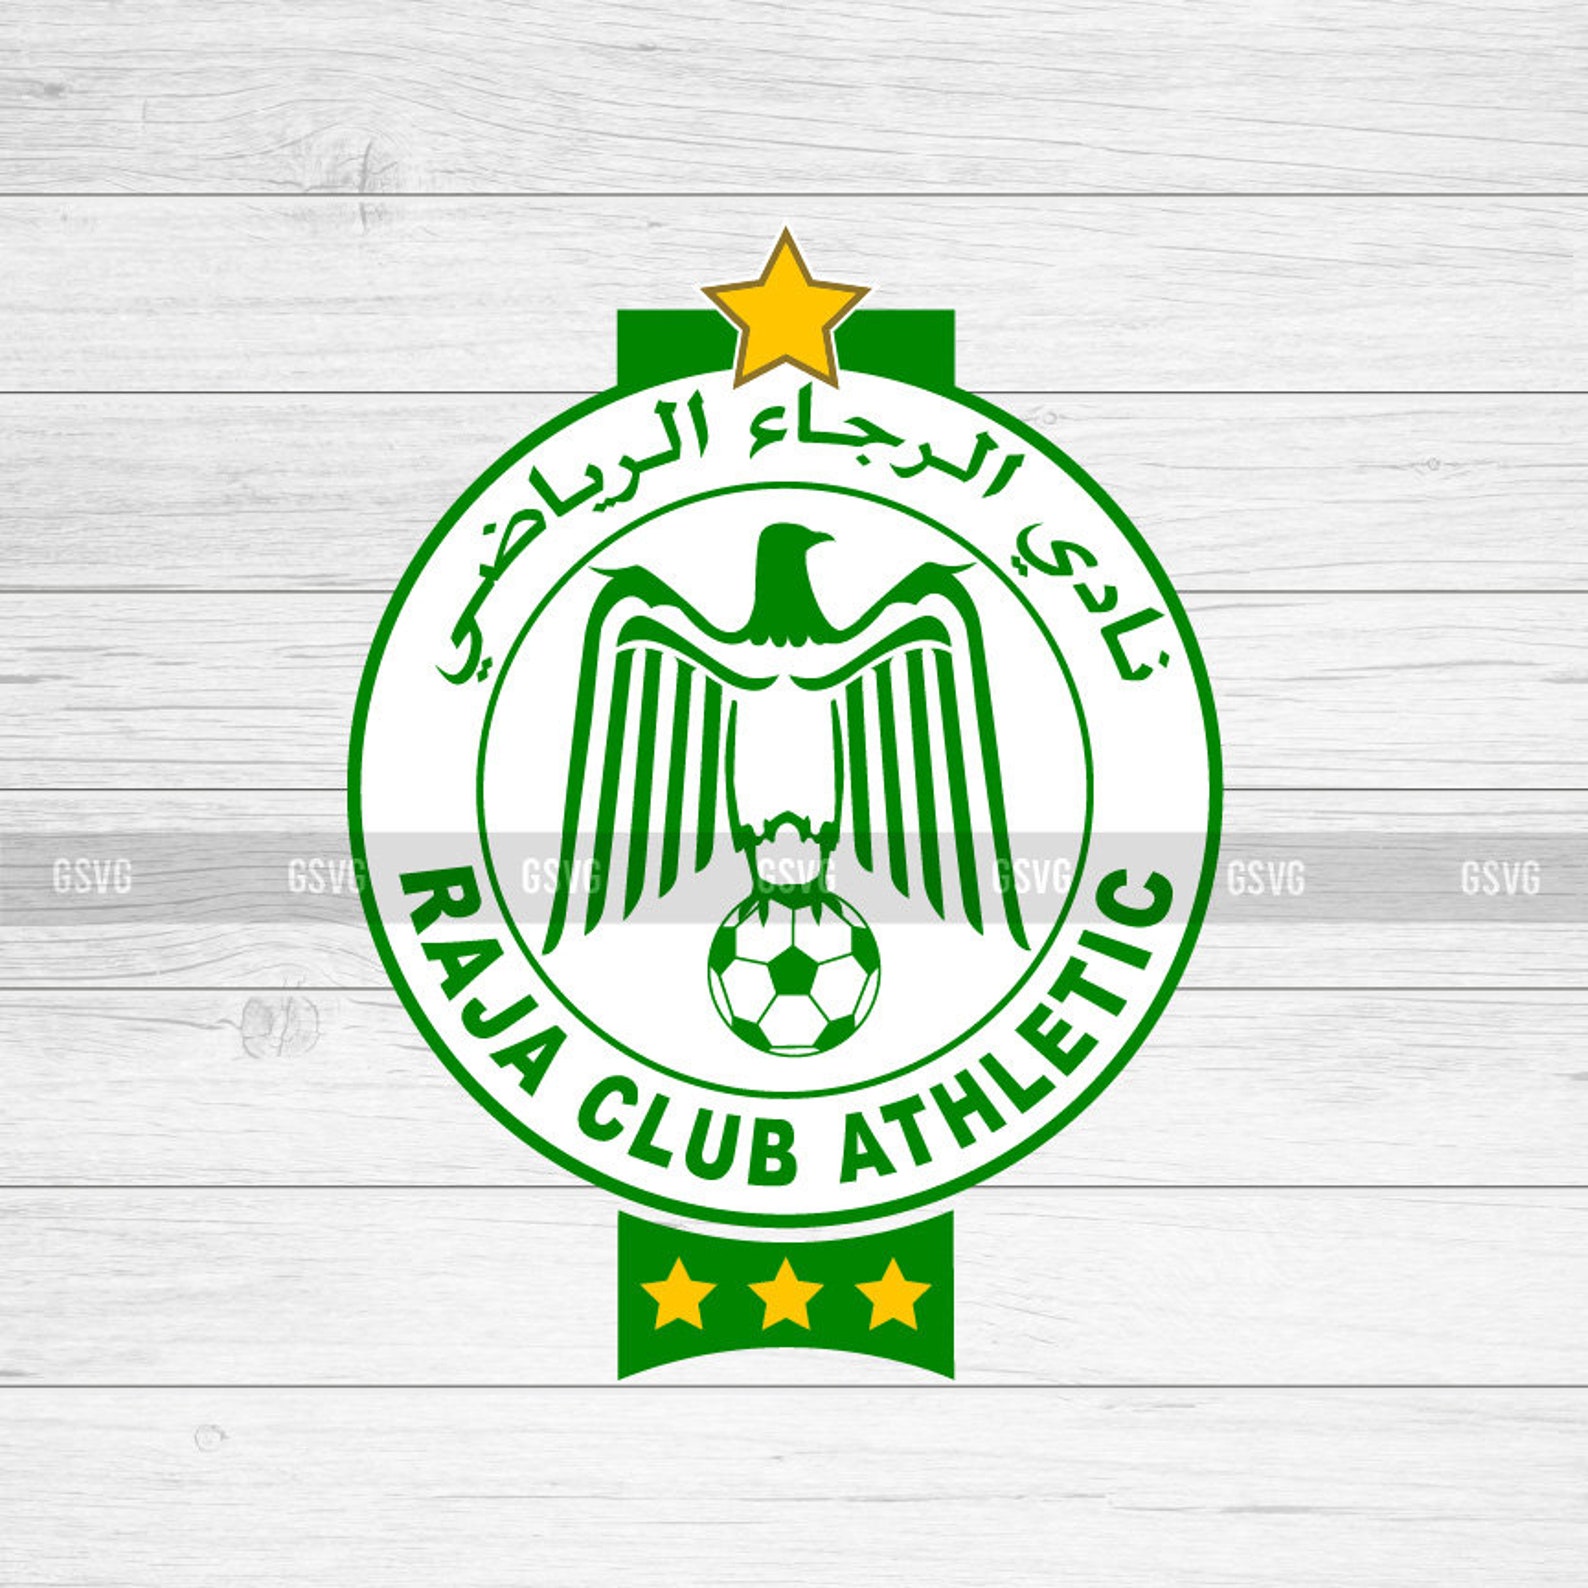 Raja Club Athletic SVG PNG EPS Vector File For Cricut Rca | Etsy